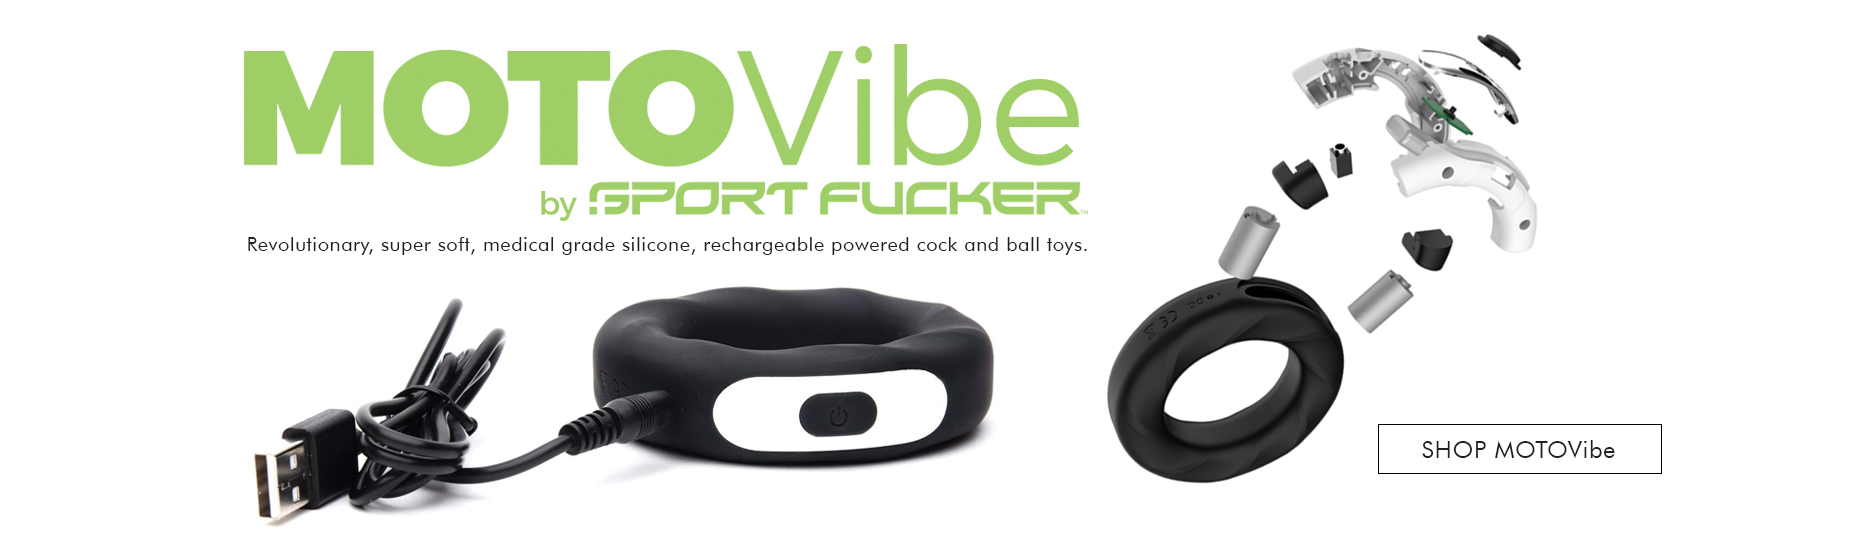 MOTOVibe By Sport Fucker -  Revolutionary, super soft, medical grade silicone, rechargeable powered cock and ball toys.